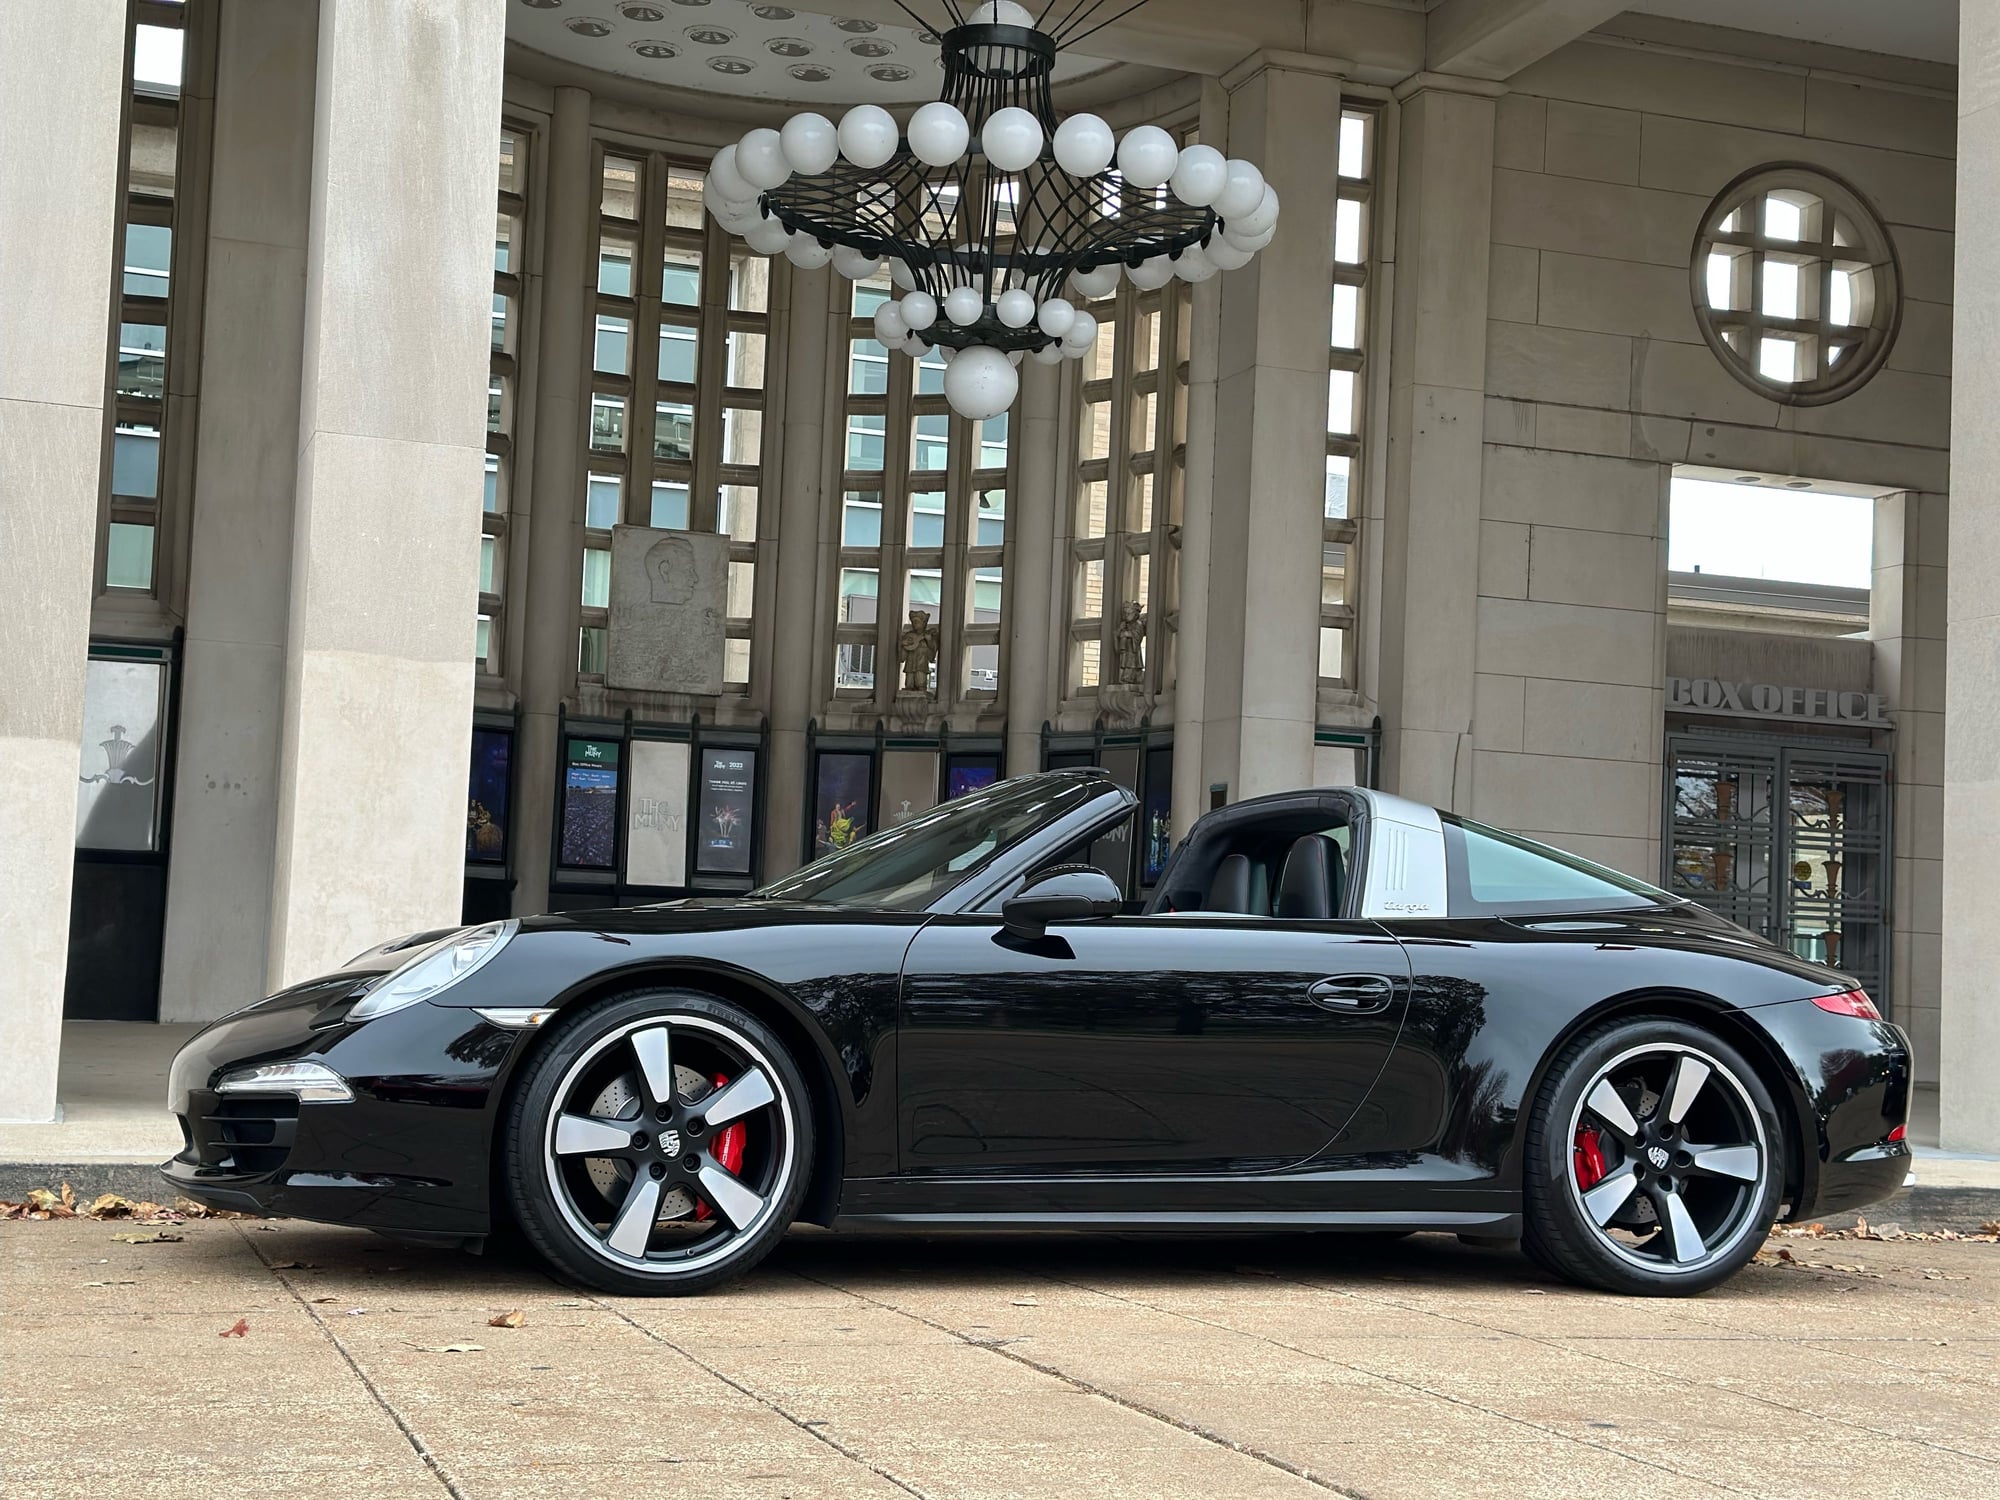 2016 Porsche 911 - 2016 911 Targa 4S - Used - VIN WP0BB2A9XGS136694 - 6 cyl - 4WD - Manual - Coupe - Black - St. Louis, MO 63130, United States